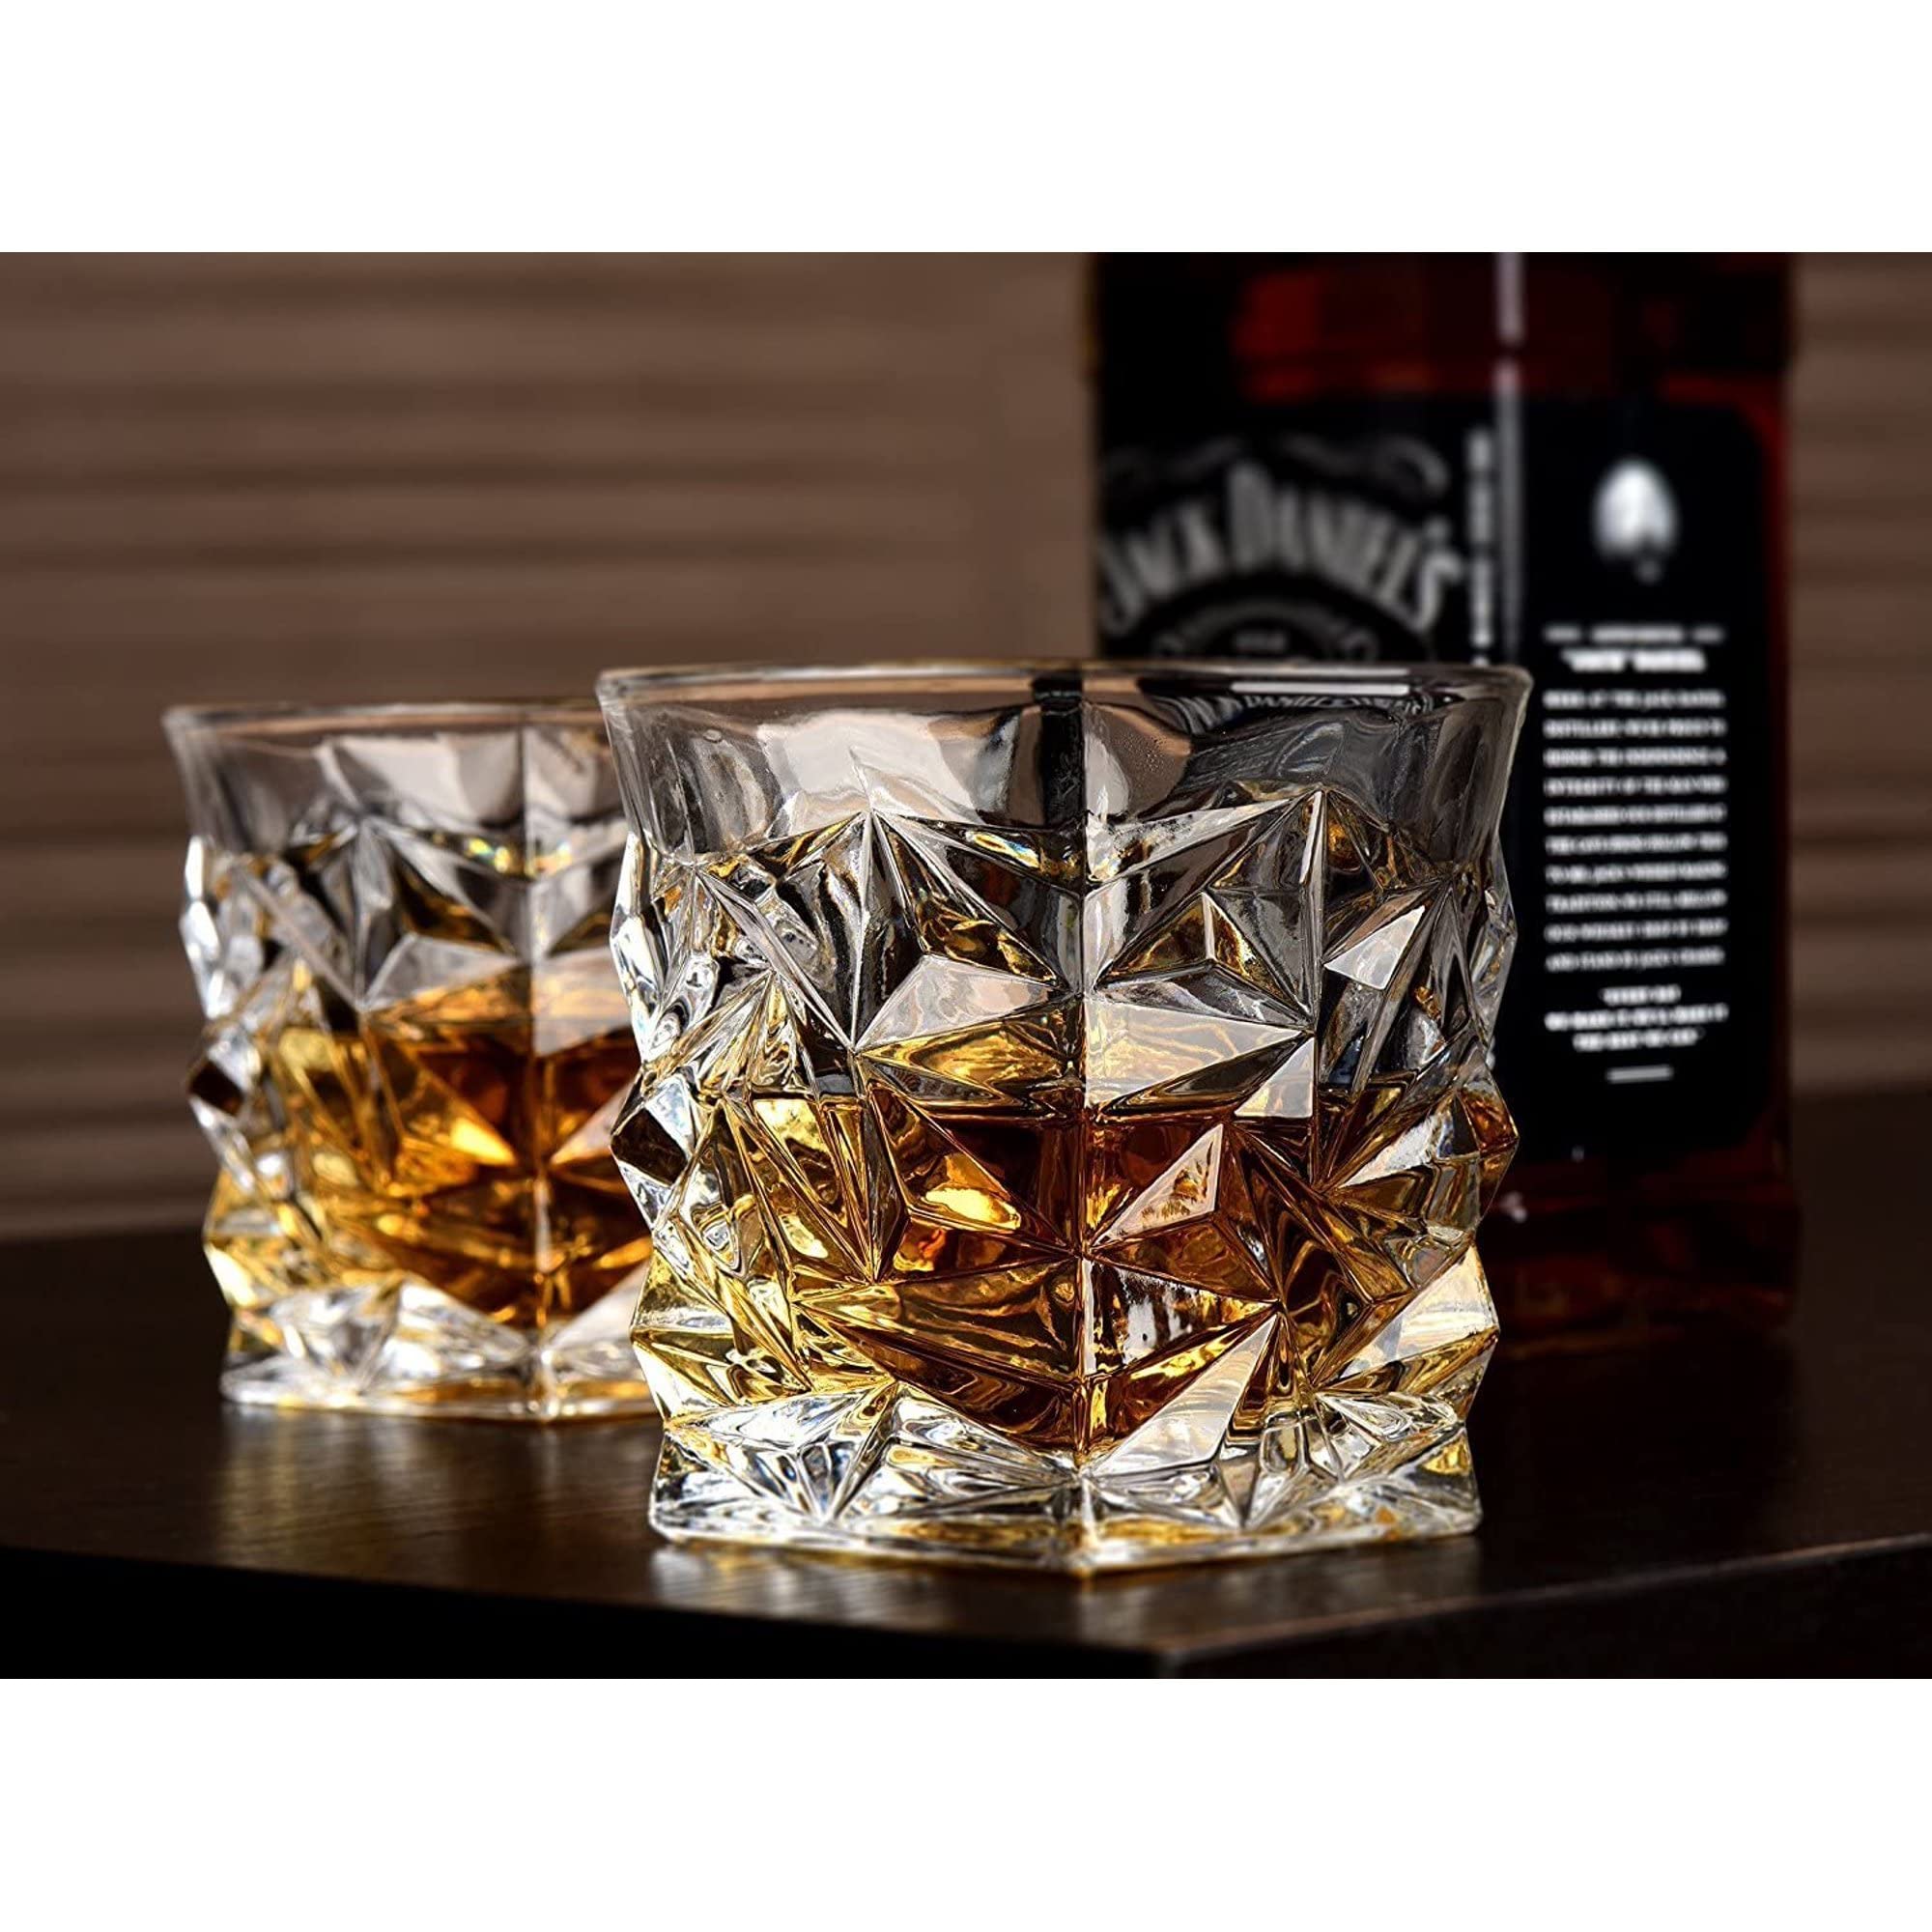 Vaci Crystal Whiskey Glasses – Set of 2 Bourbon Glasses, Tumblers for Drinking Scotch, Cognac, Irish Whisky, Large 10oz Premium Lead-Free with Stainless Steel Flasks, Cups, Luxury Gift Box